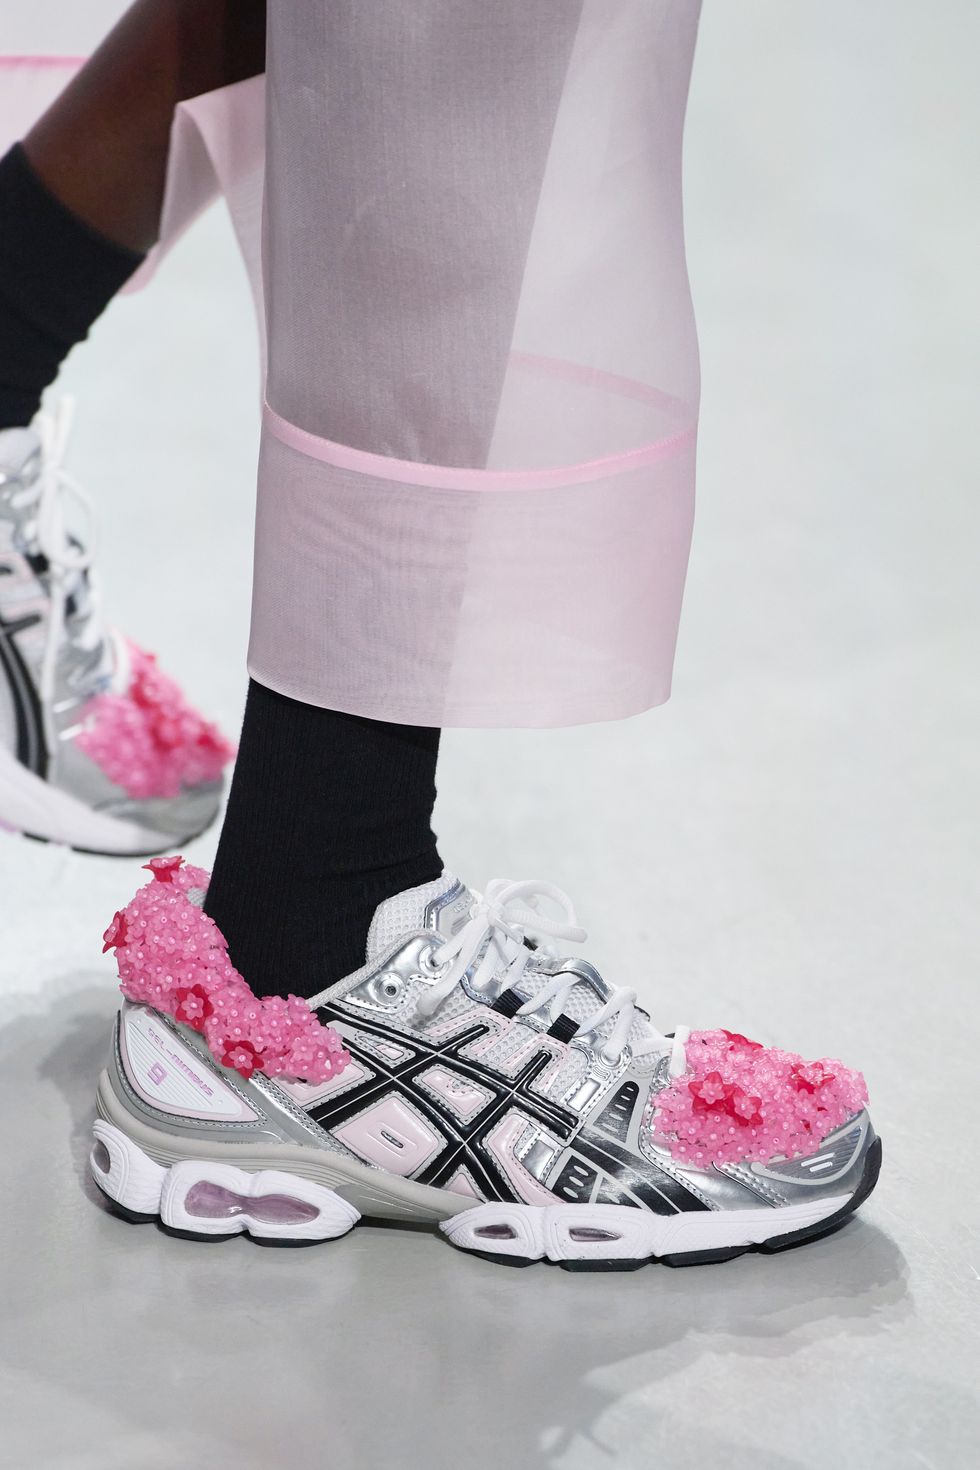 a woman's feet wearing white and pink shoes